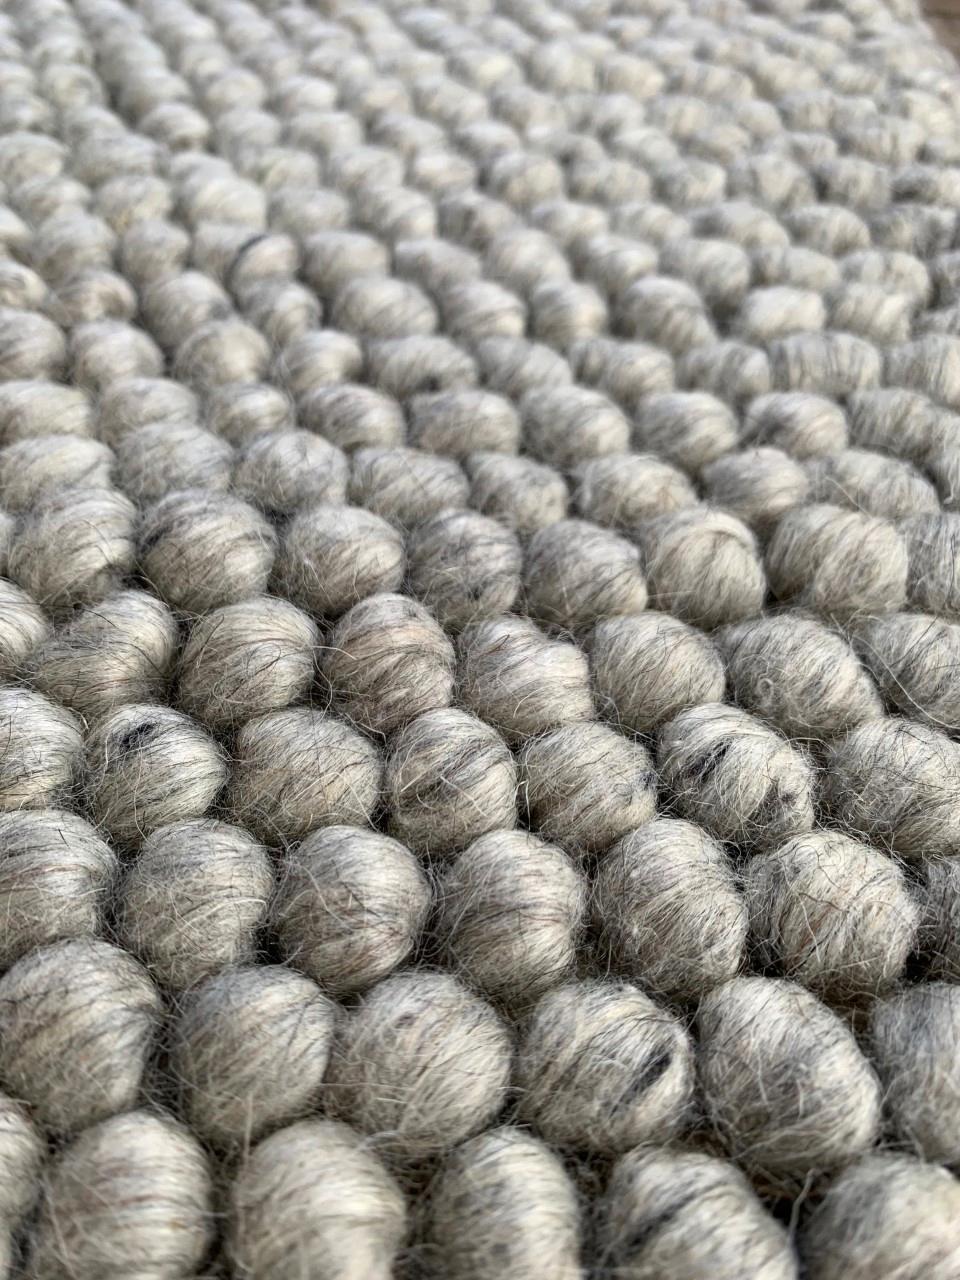 The Karma weave is a masterfully loomed style, that creates texture and tone in any space. This sophisticated quality wool rug is extremely dense, making it a super soft addition to all areas. This luxury weave comes in a perfect palette of